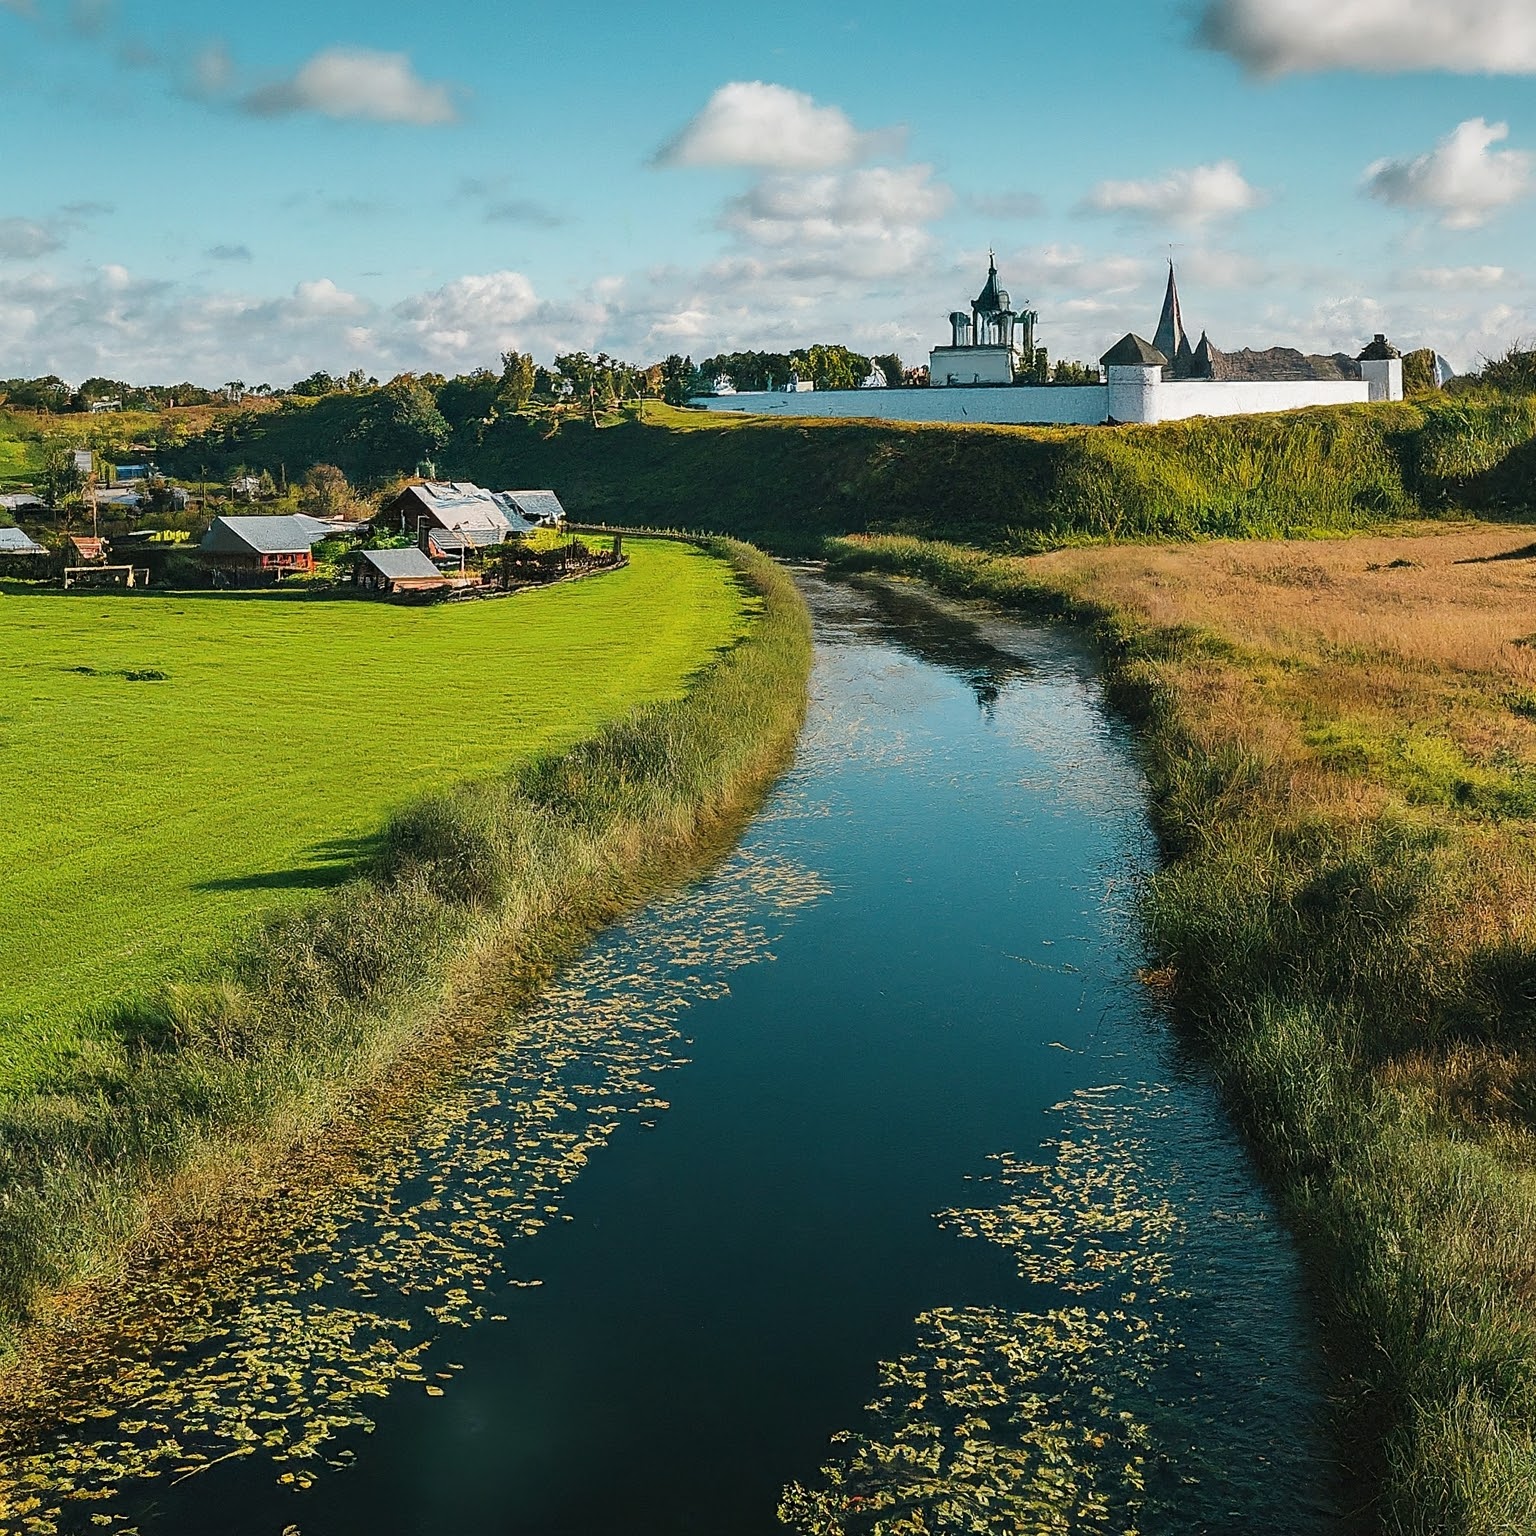 Peaceful landscape near Suzdal, Russia: river, meadows, and a monastery.